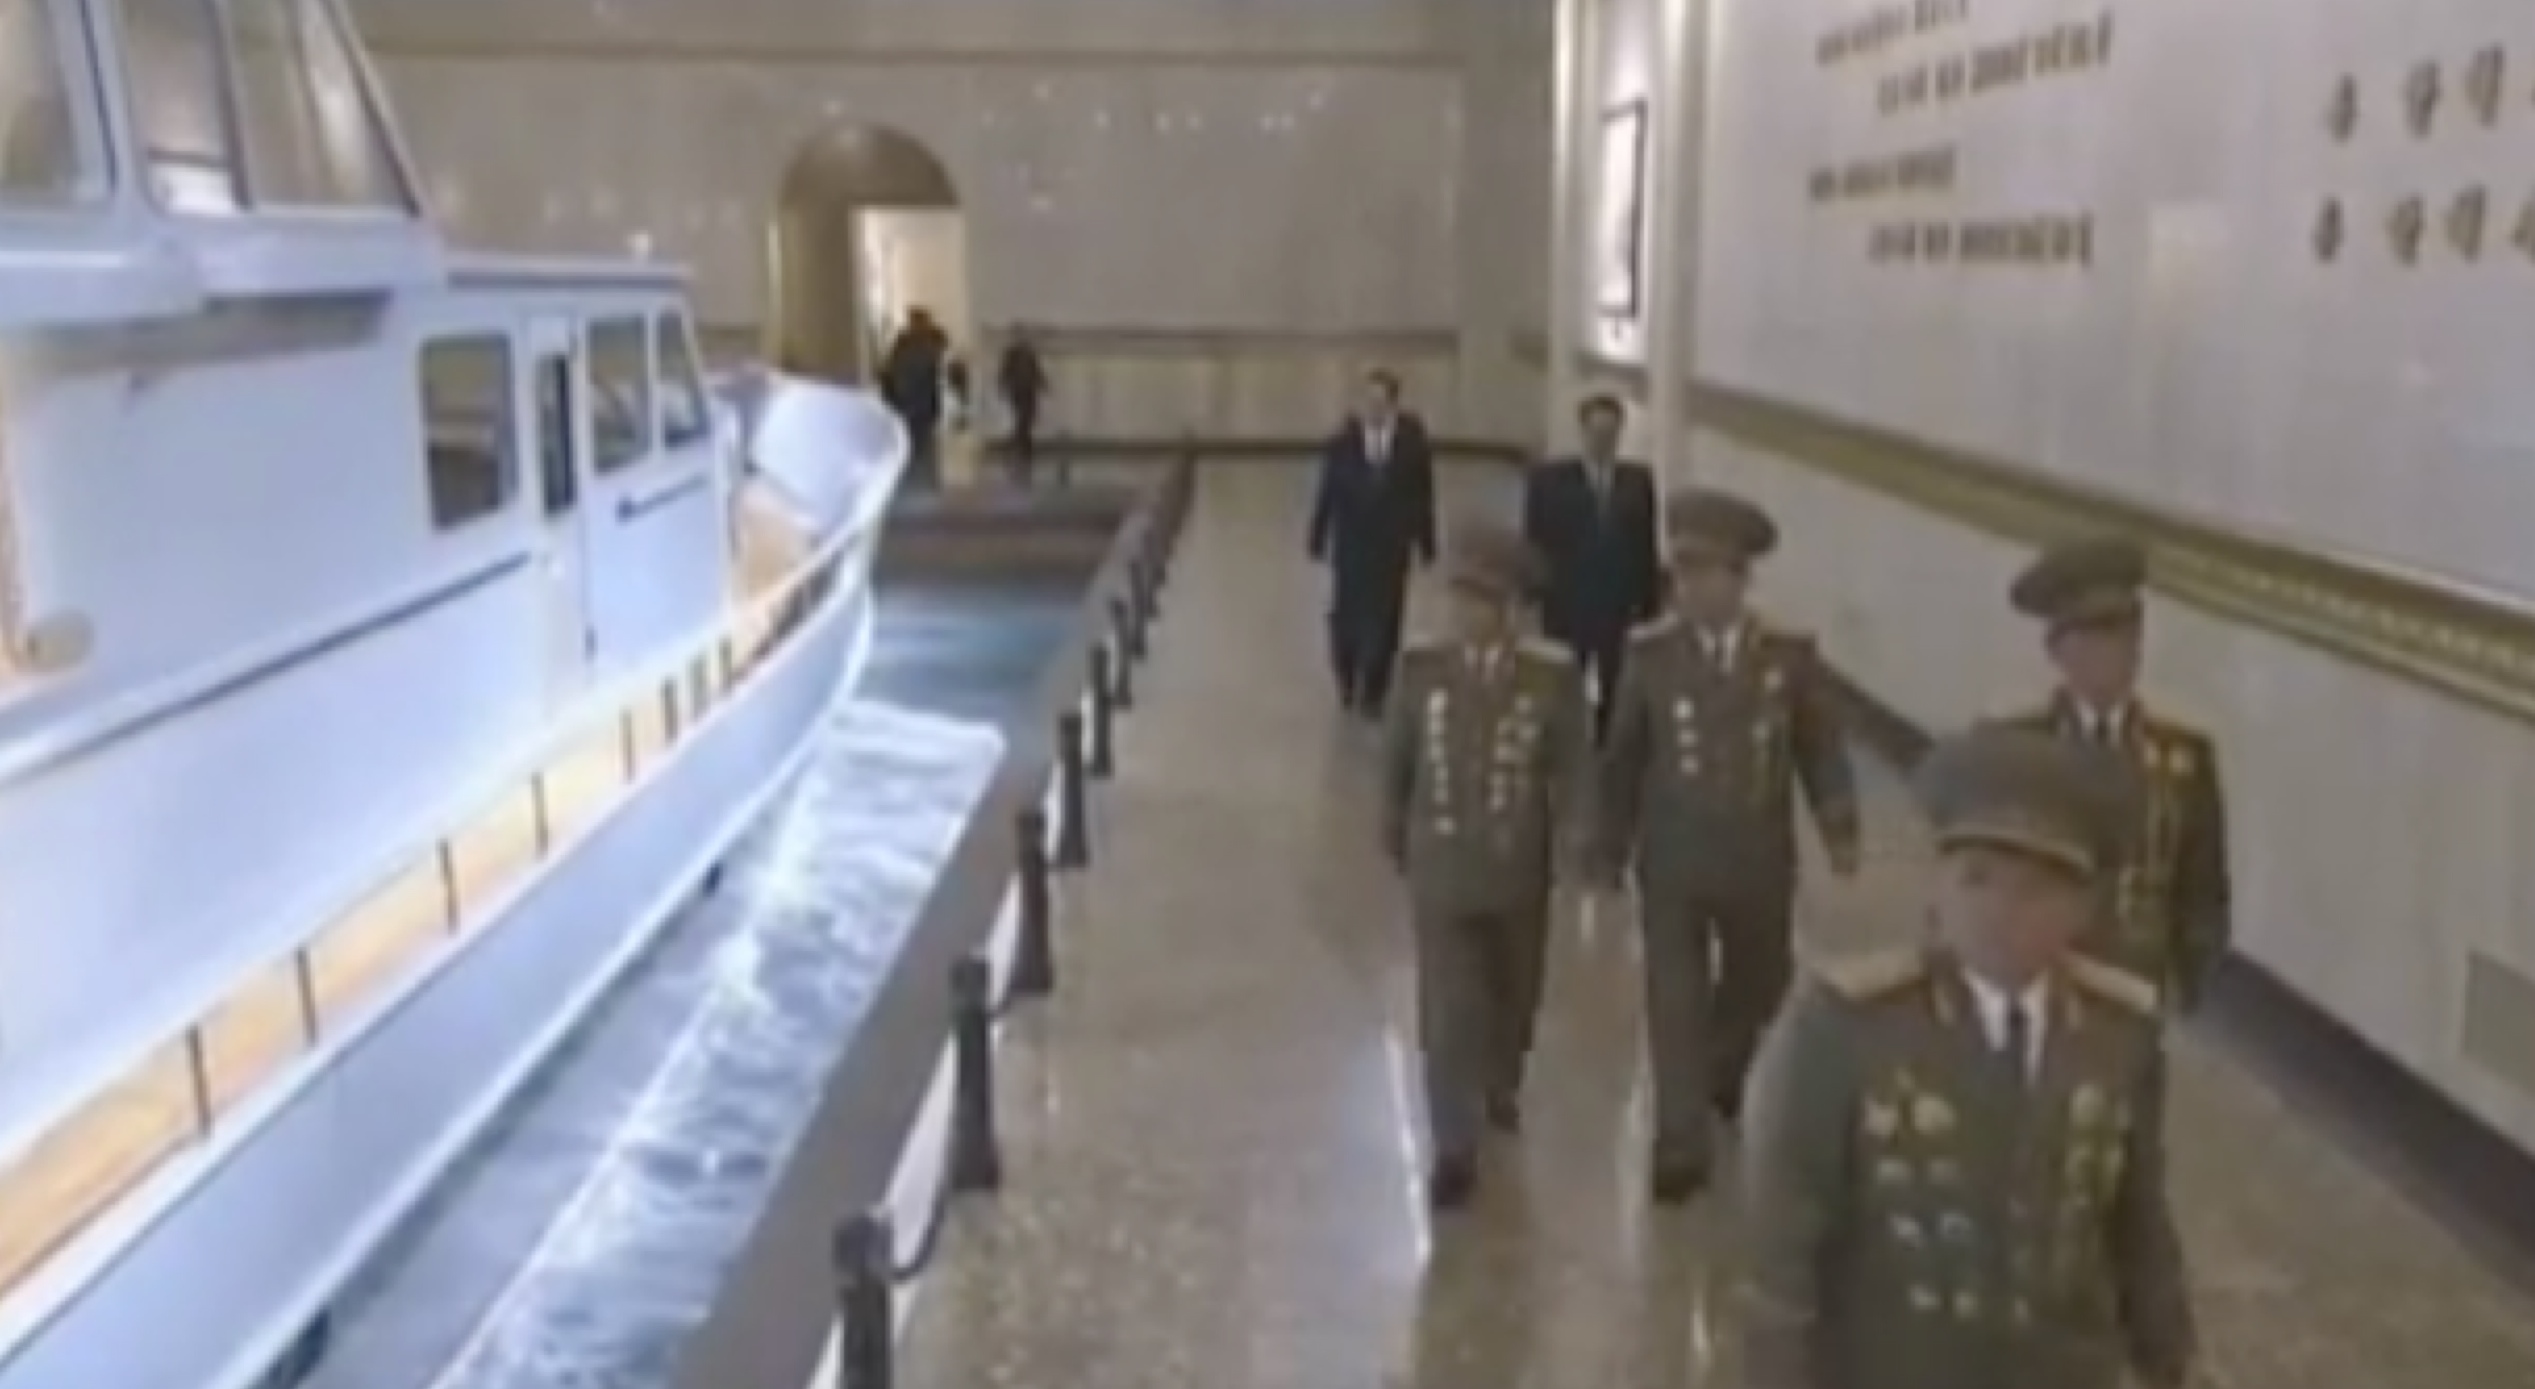 Senior KPA command staff and WPK cadres file past a display of Kim Jong Il's personal boat on February 16, 2017 at the Ku'msusan Palace of the Sun in Pyongyang (Photo: Korean Central Television).